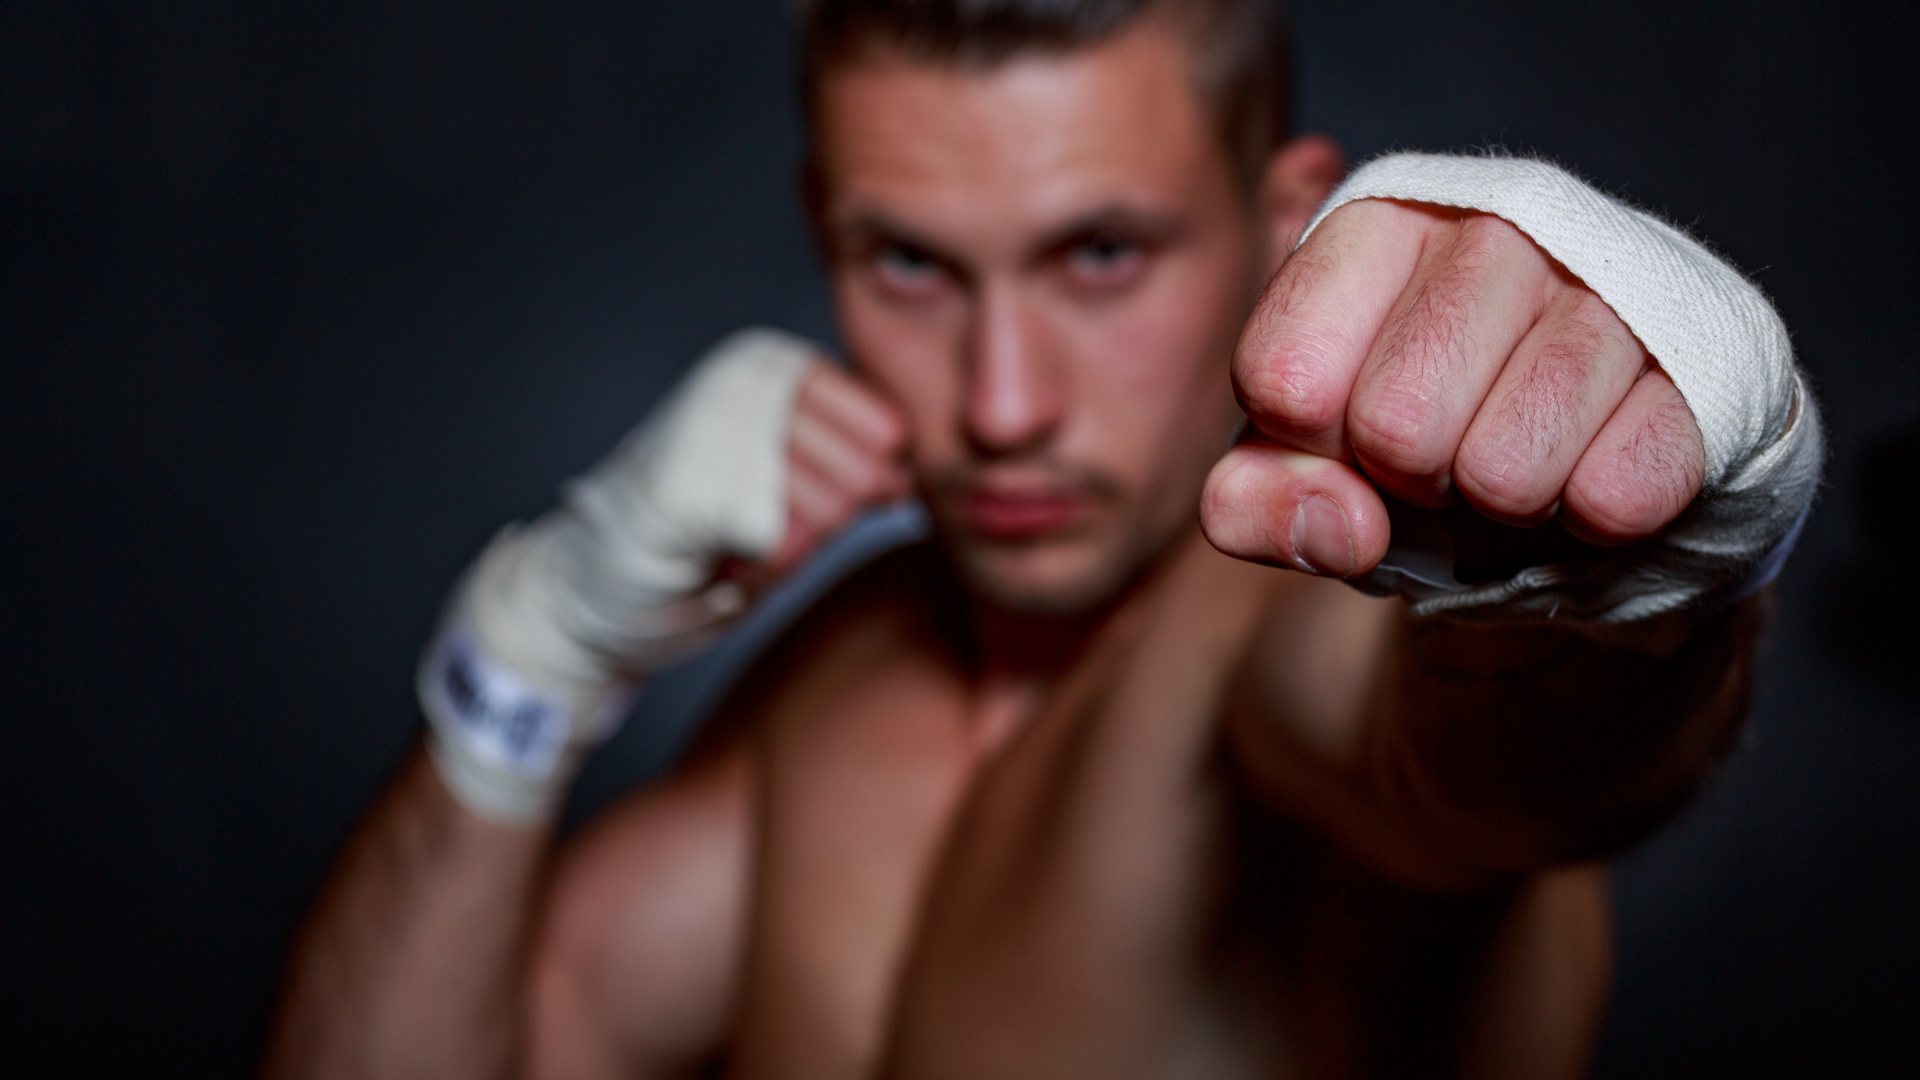 Boxing, Muscle, Bodybuilder, Arm, Hand. Wallpaper in 1920x1080 Resolution